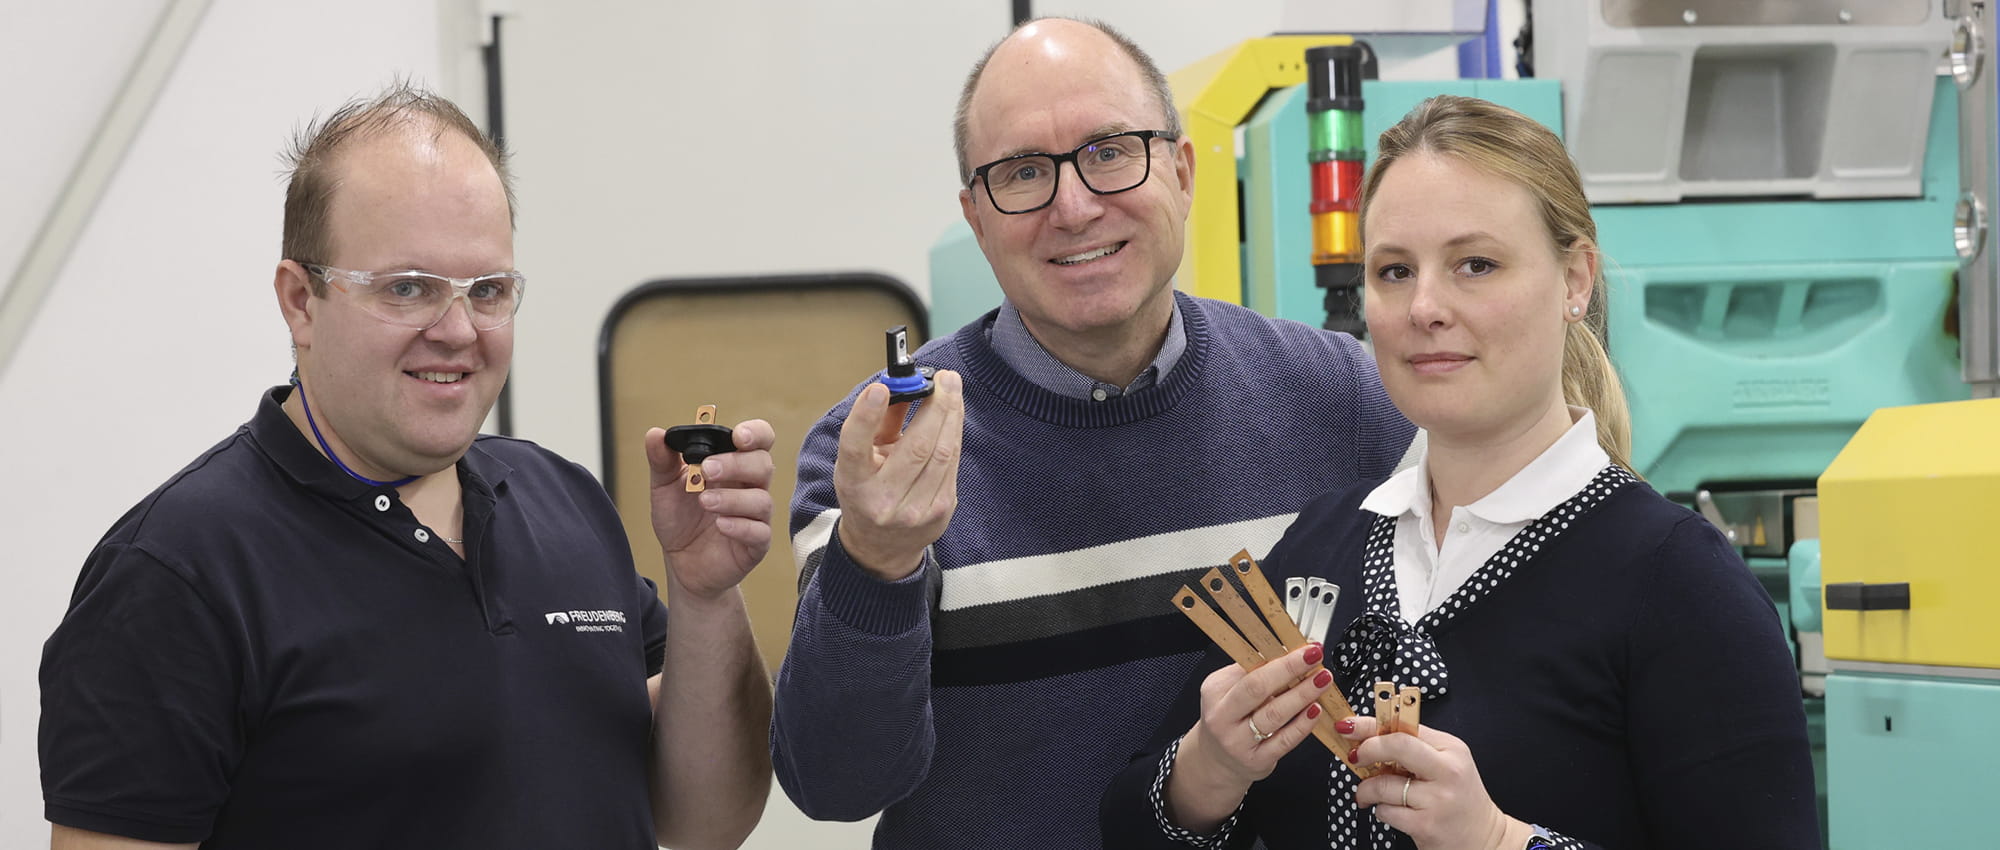 Incubation-Team Andreas Tinz,  Carsten Former and Katinka Raschke smiling and holding Busbar products into the camera. 